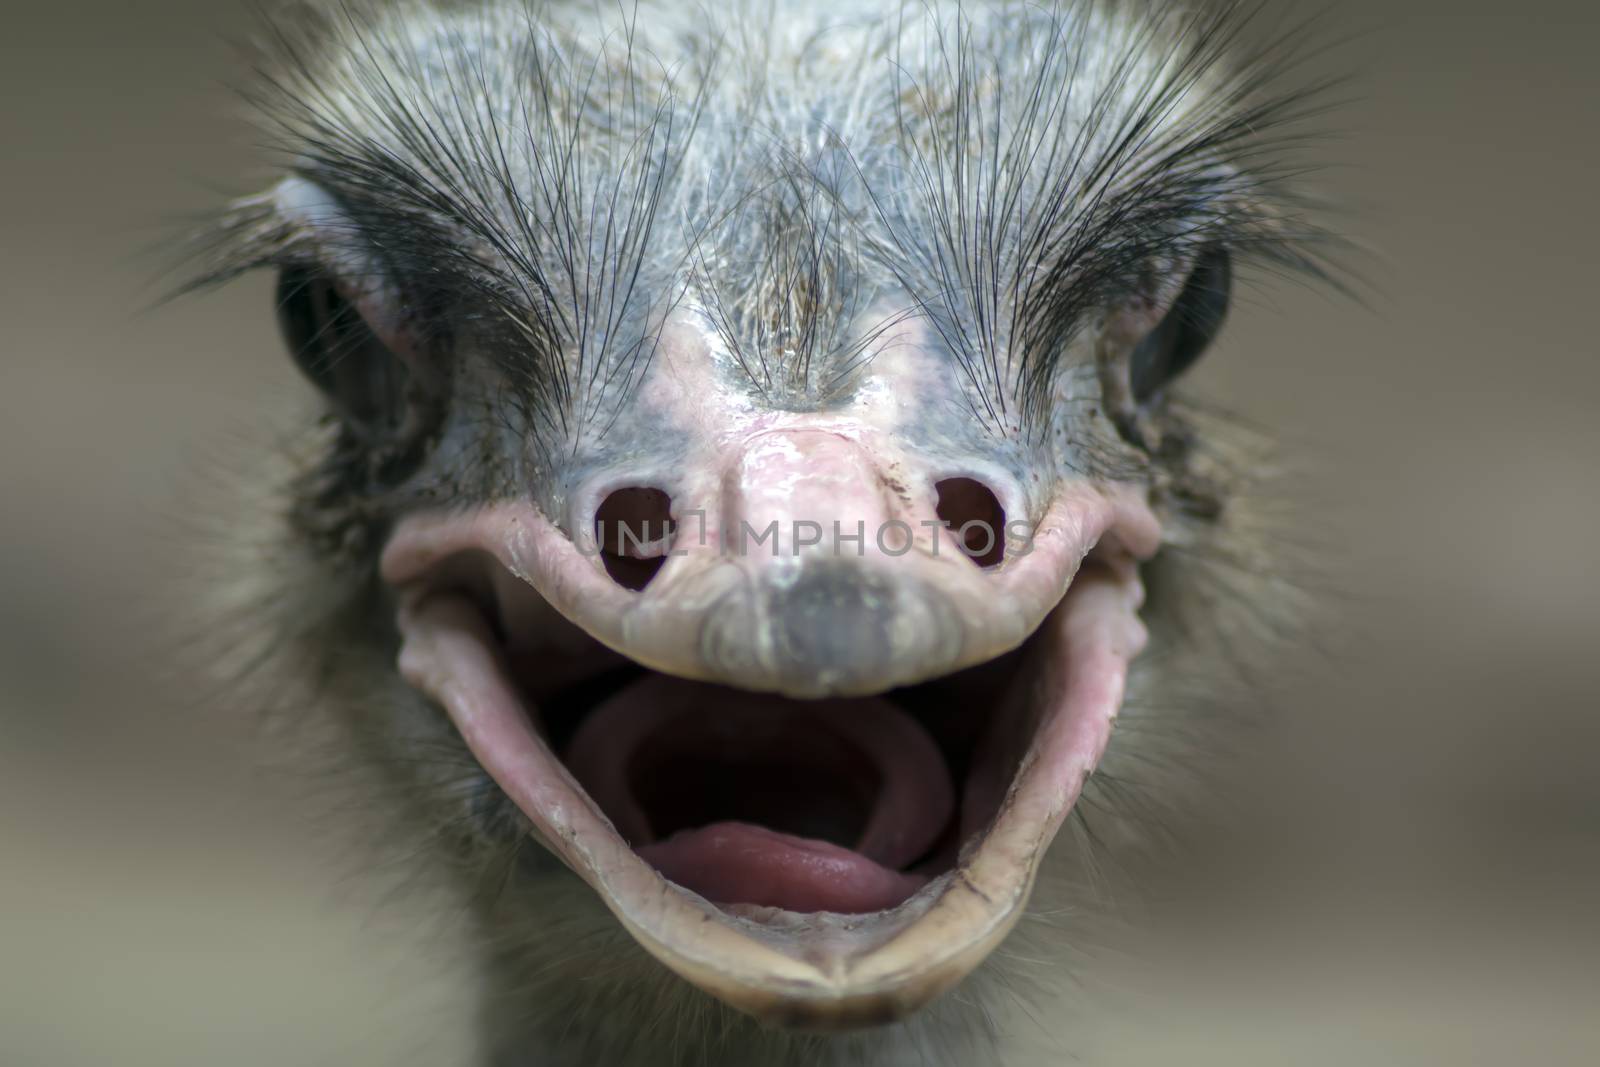 Common Ostrich Portrait. Struthio Camelus is either one or two species of large flightless birds native to Africa.